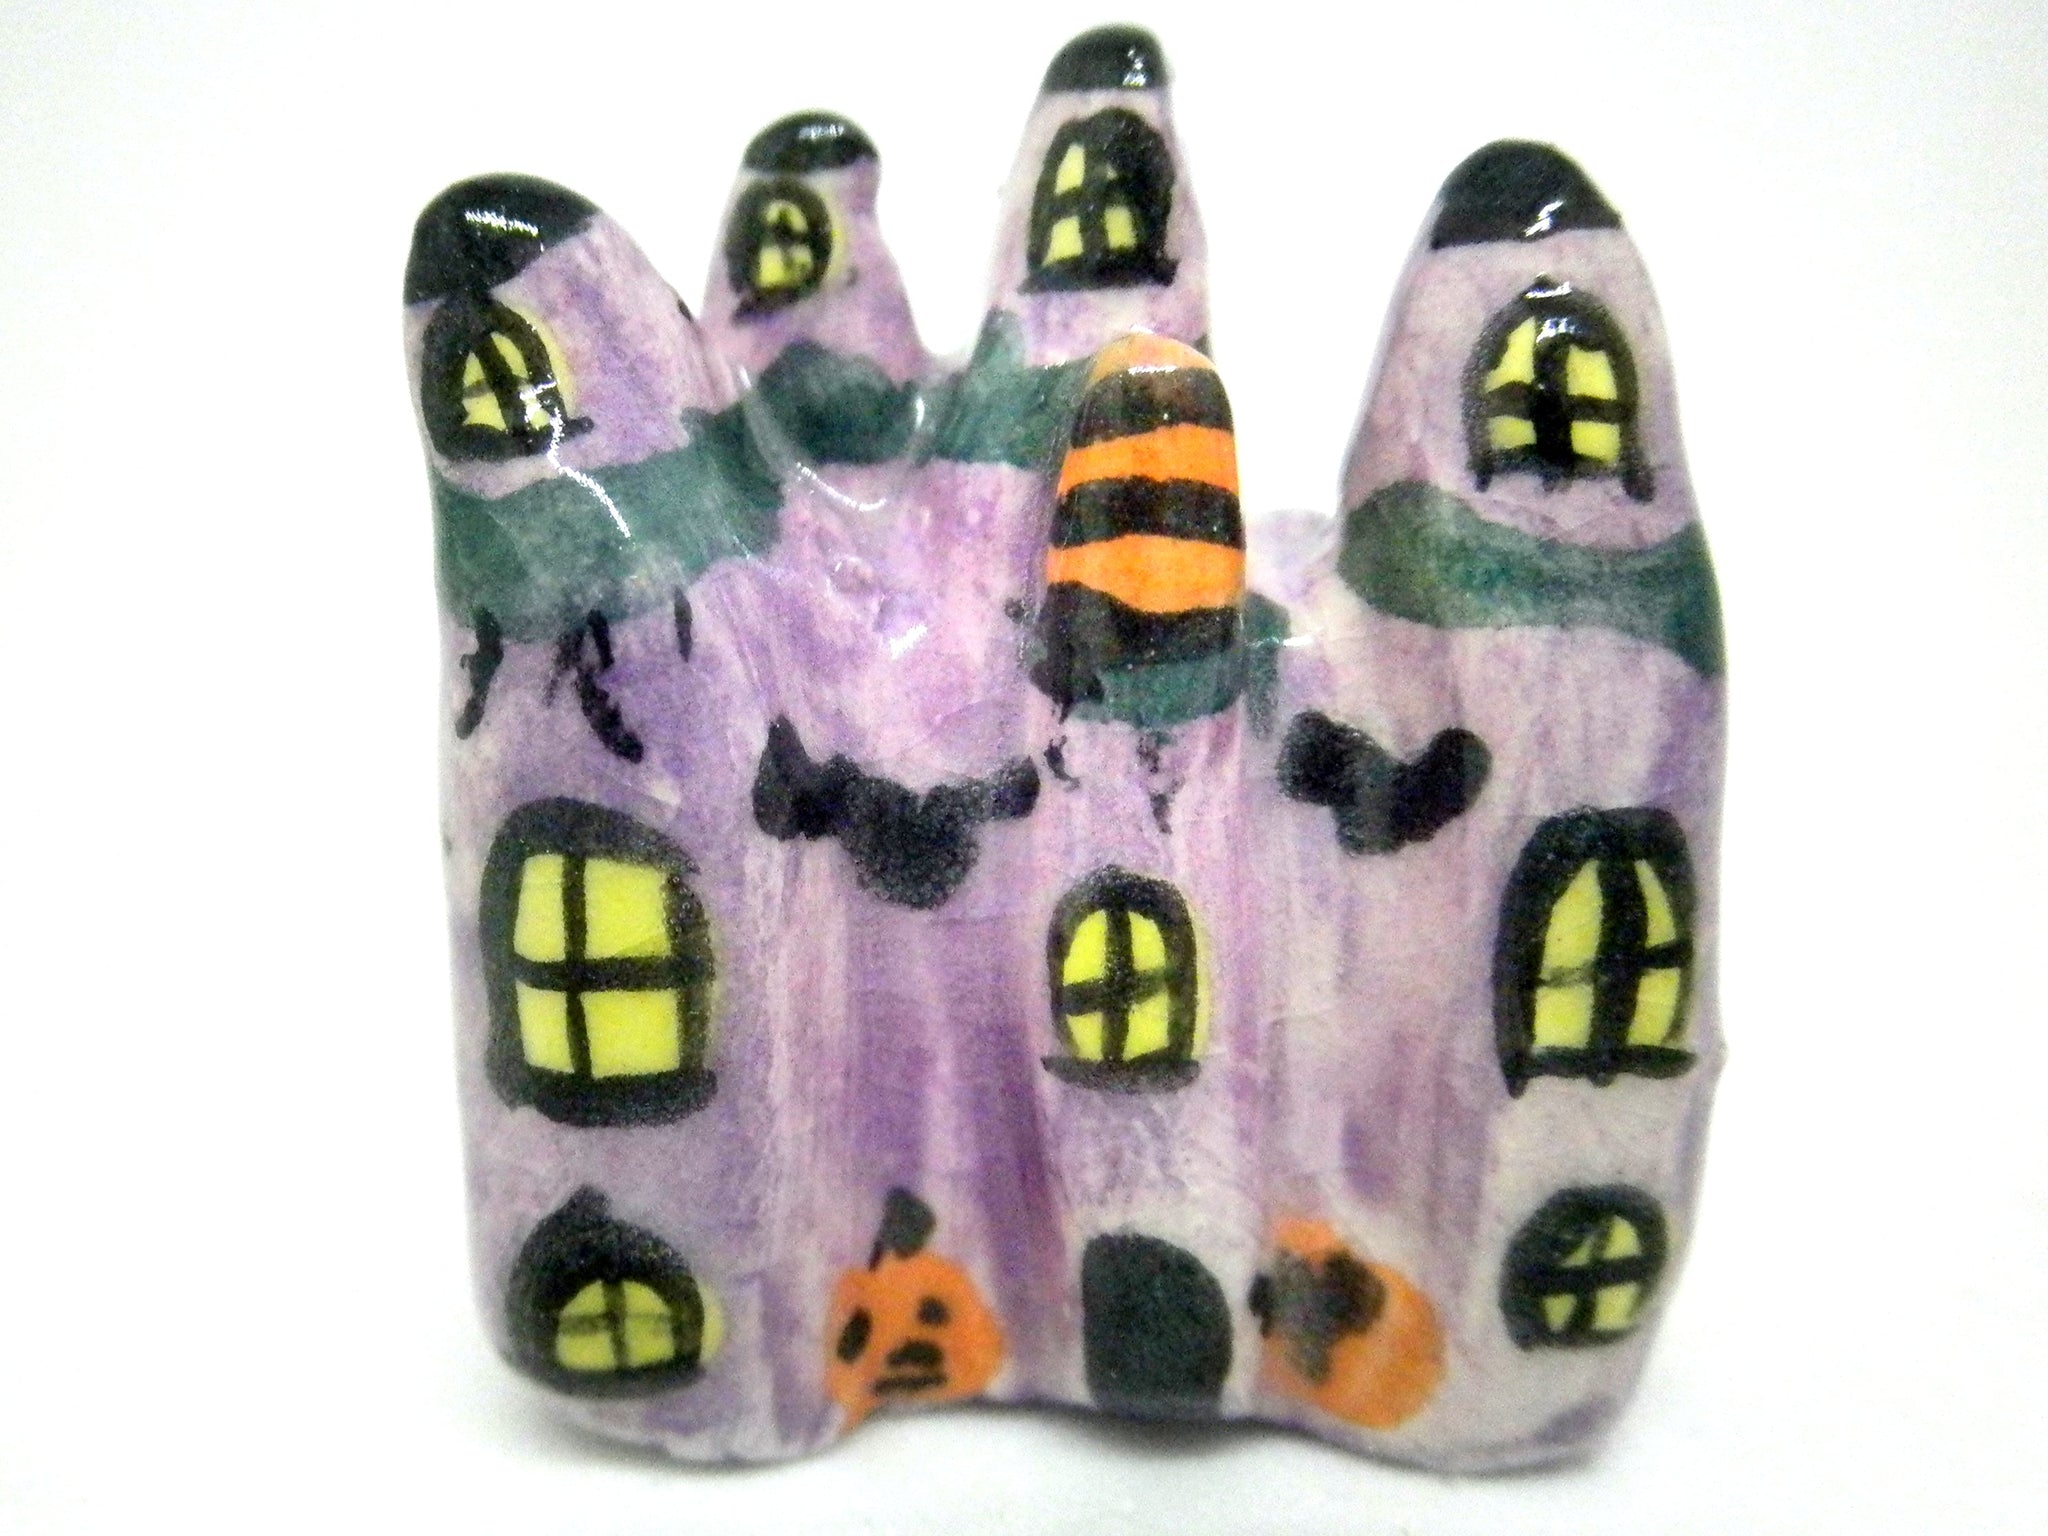 Miniature Ceramic Halloween haunted house with towers